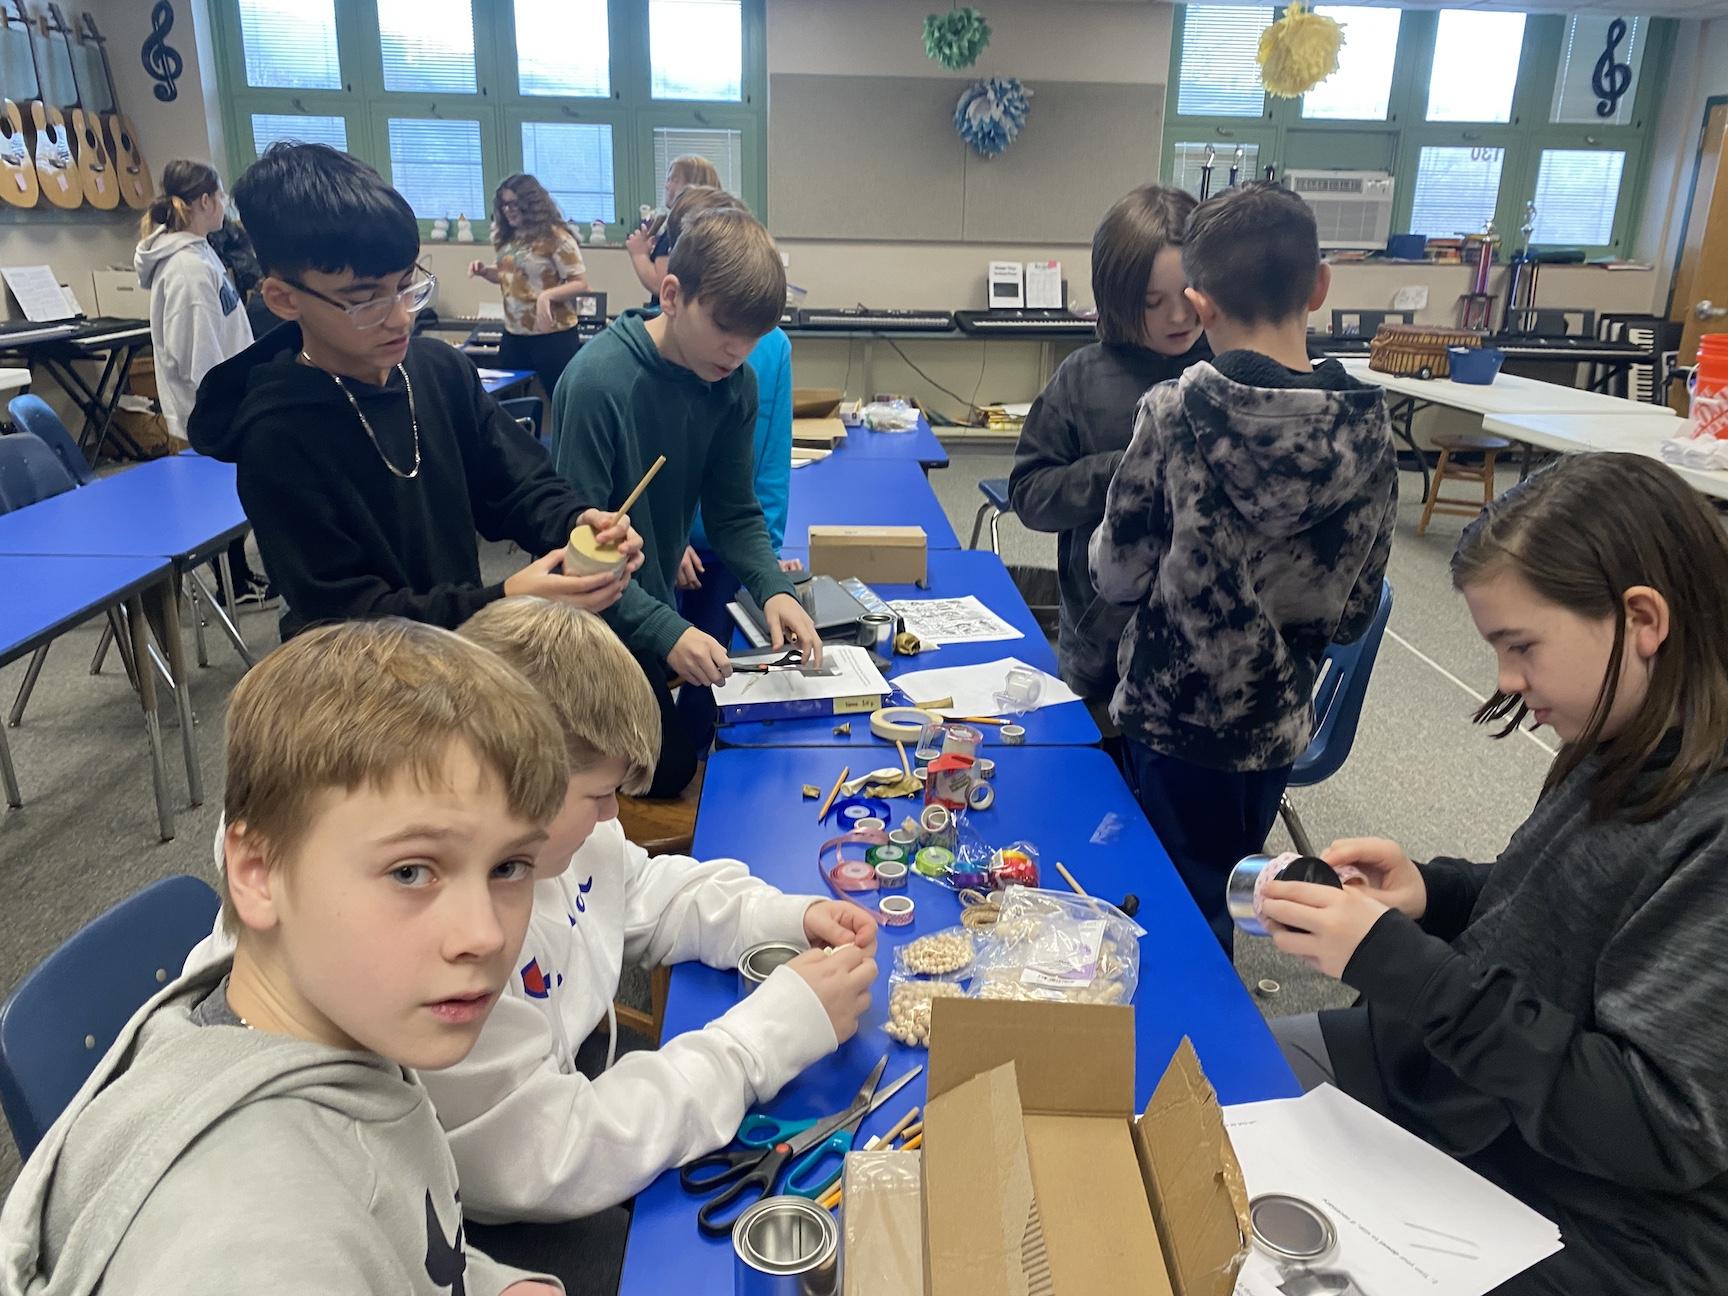 Trafford Middle School sixth-graders assemble their instruments